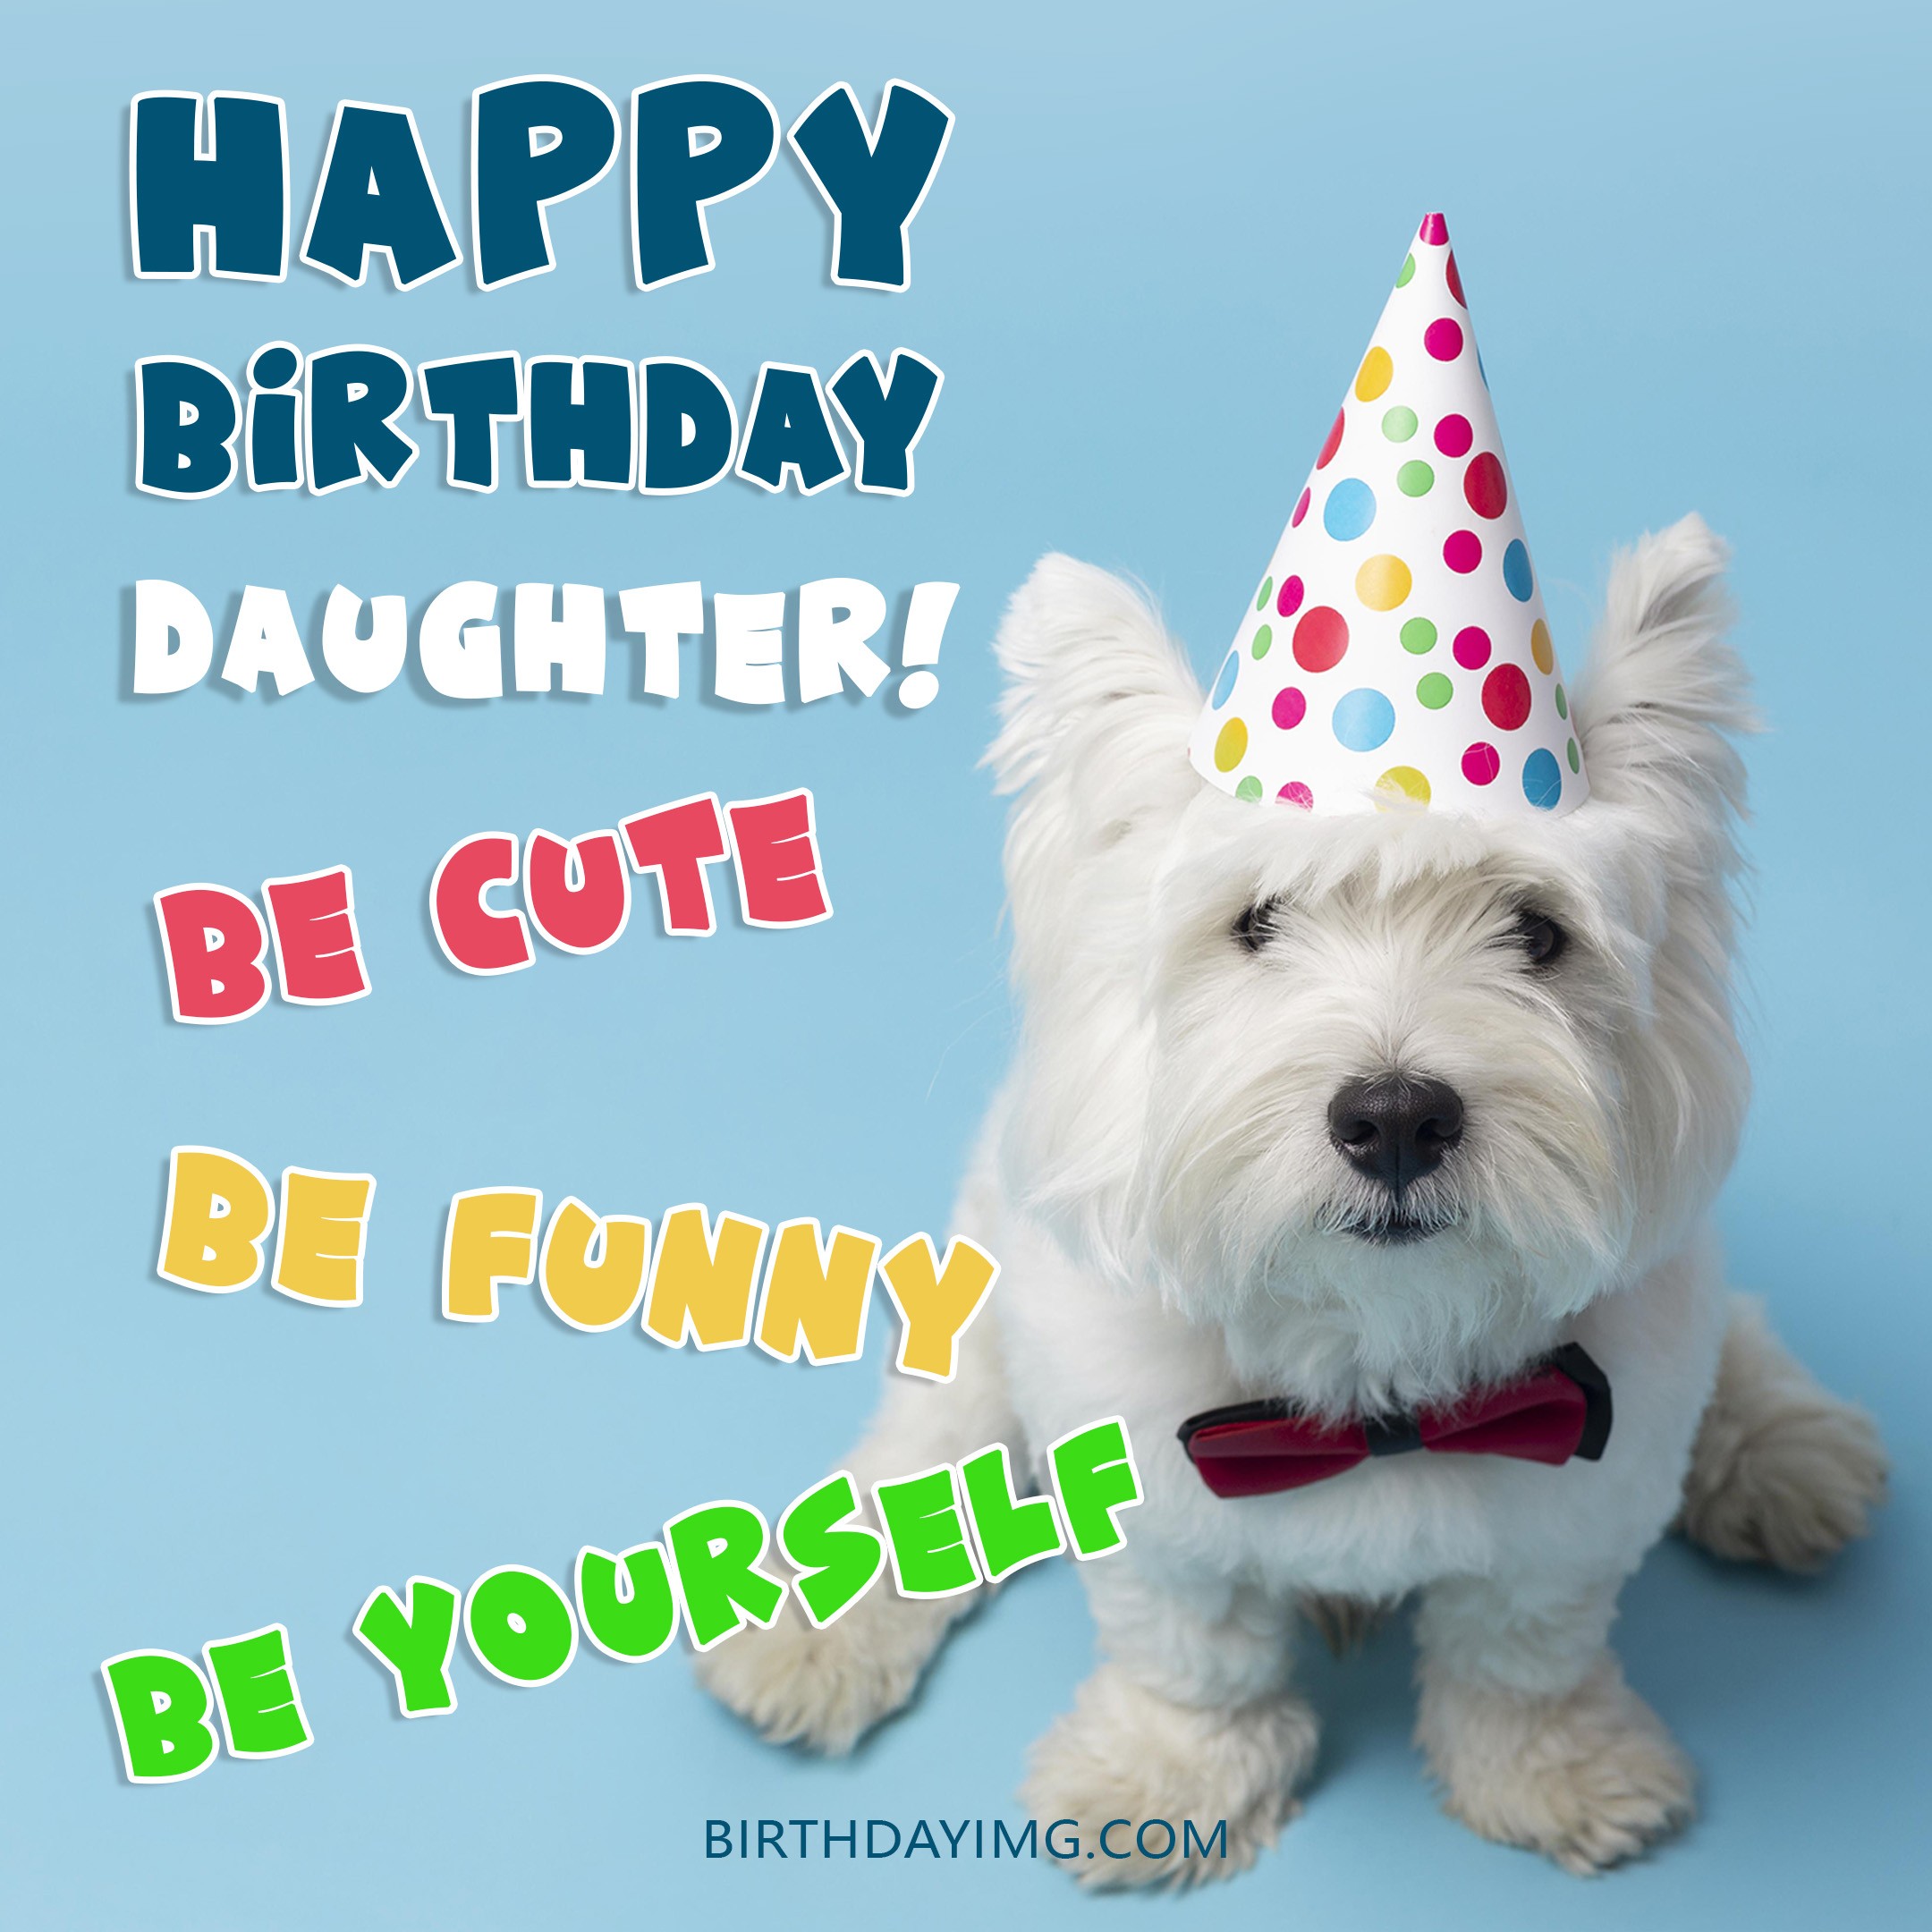 Free Cute Happy Birthday Image For Daughter With Dog - birthdayimg.com